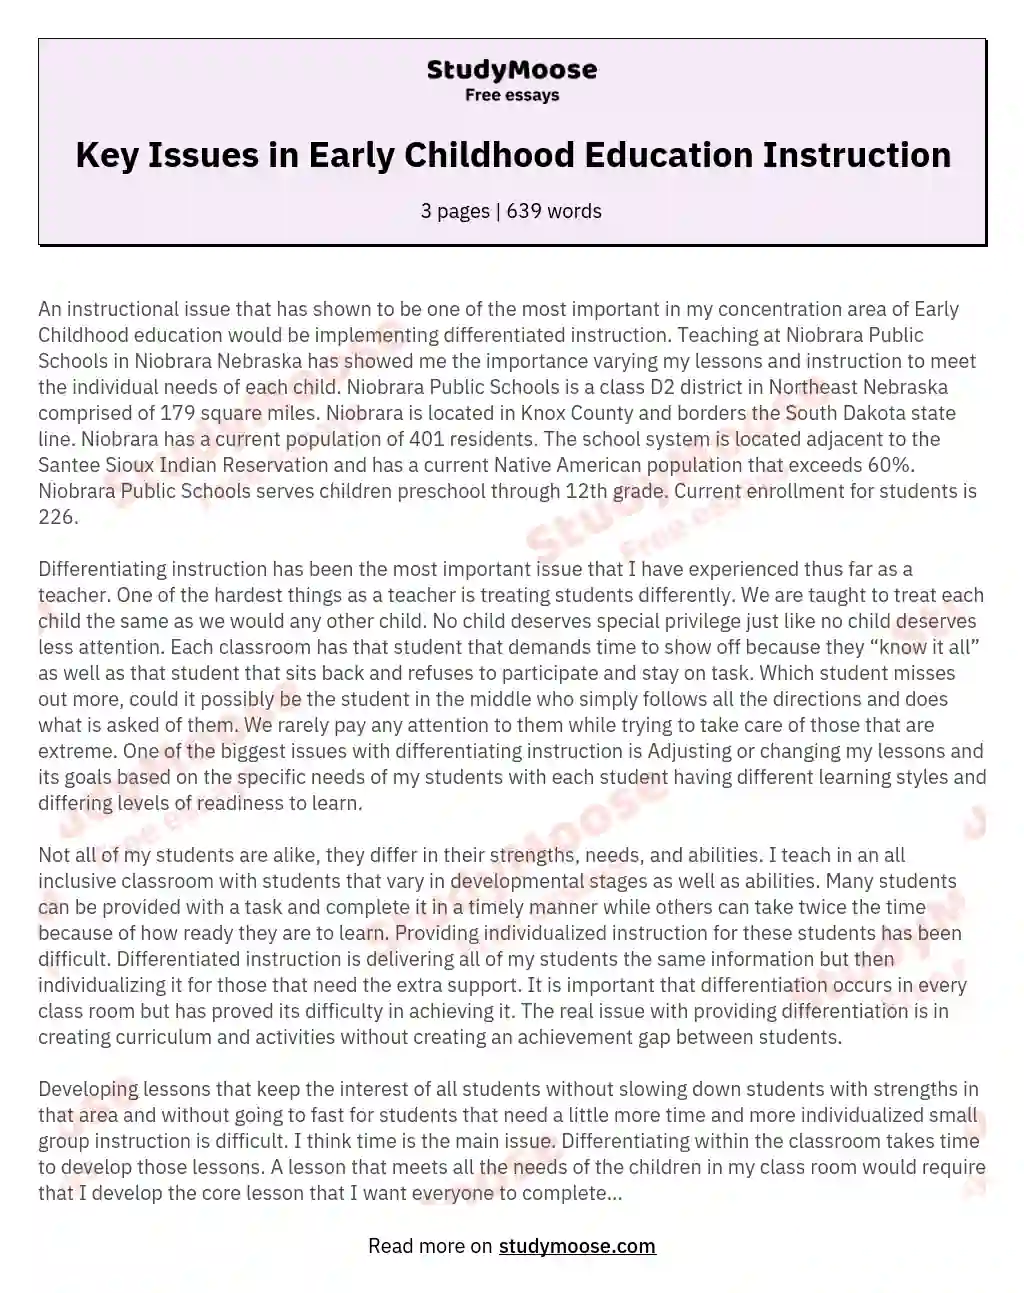 Key Issues in Early Childhood Education Instruction essay